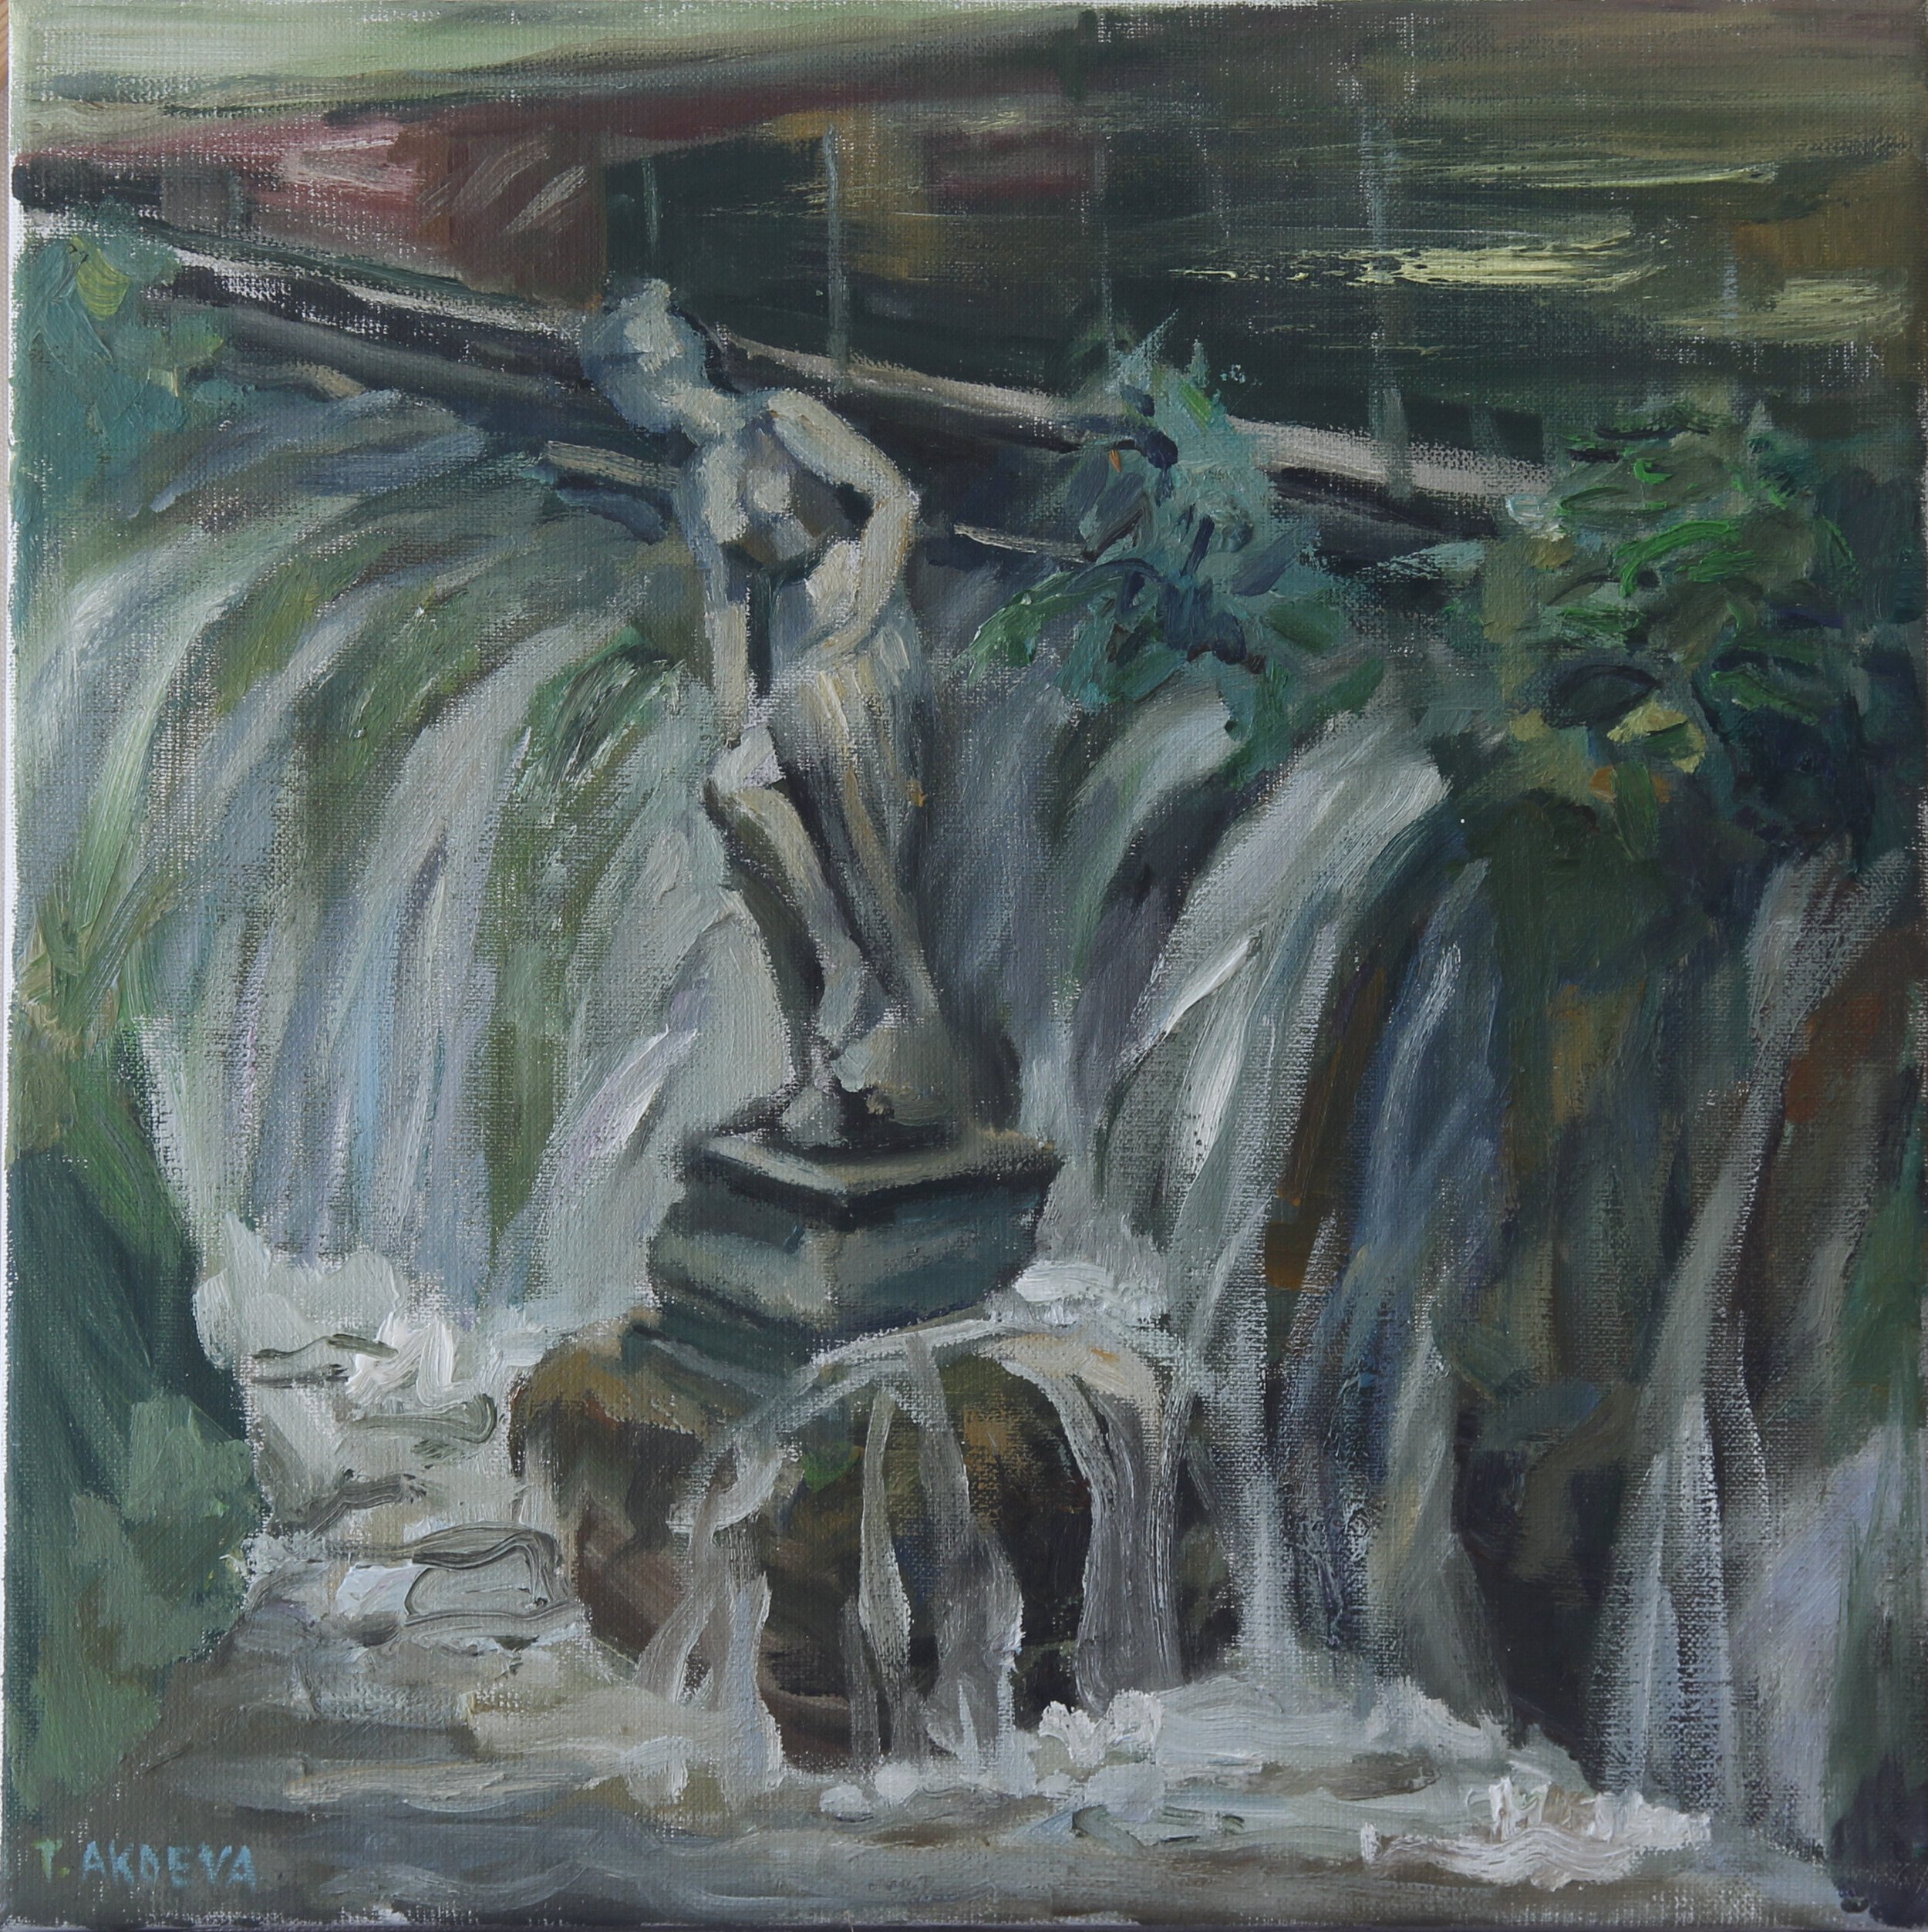 Venus near a waterfall, 2023, France. Oil on linen, 20x20 inches.